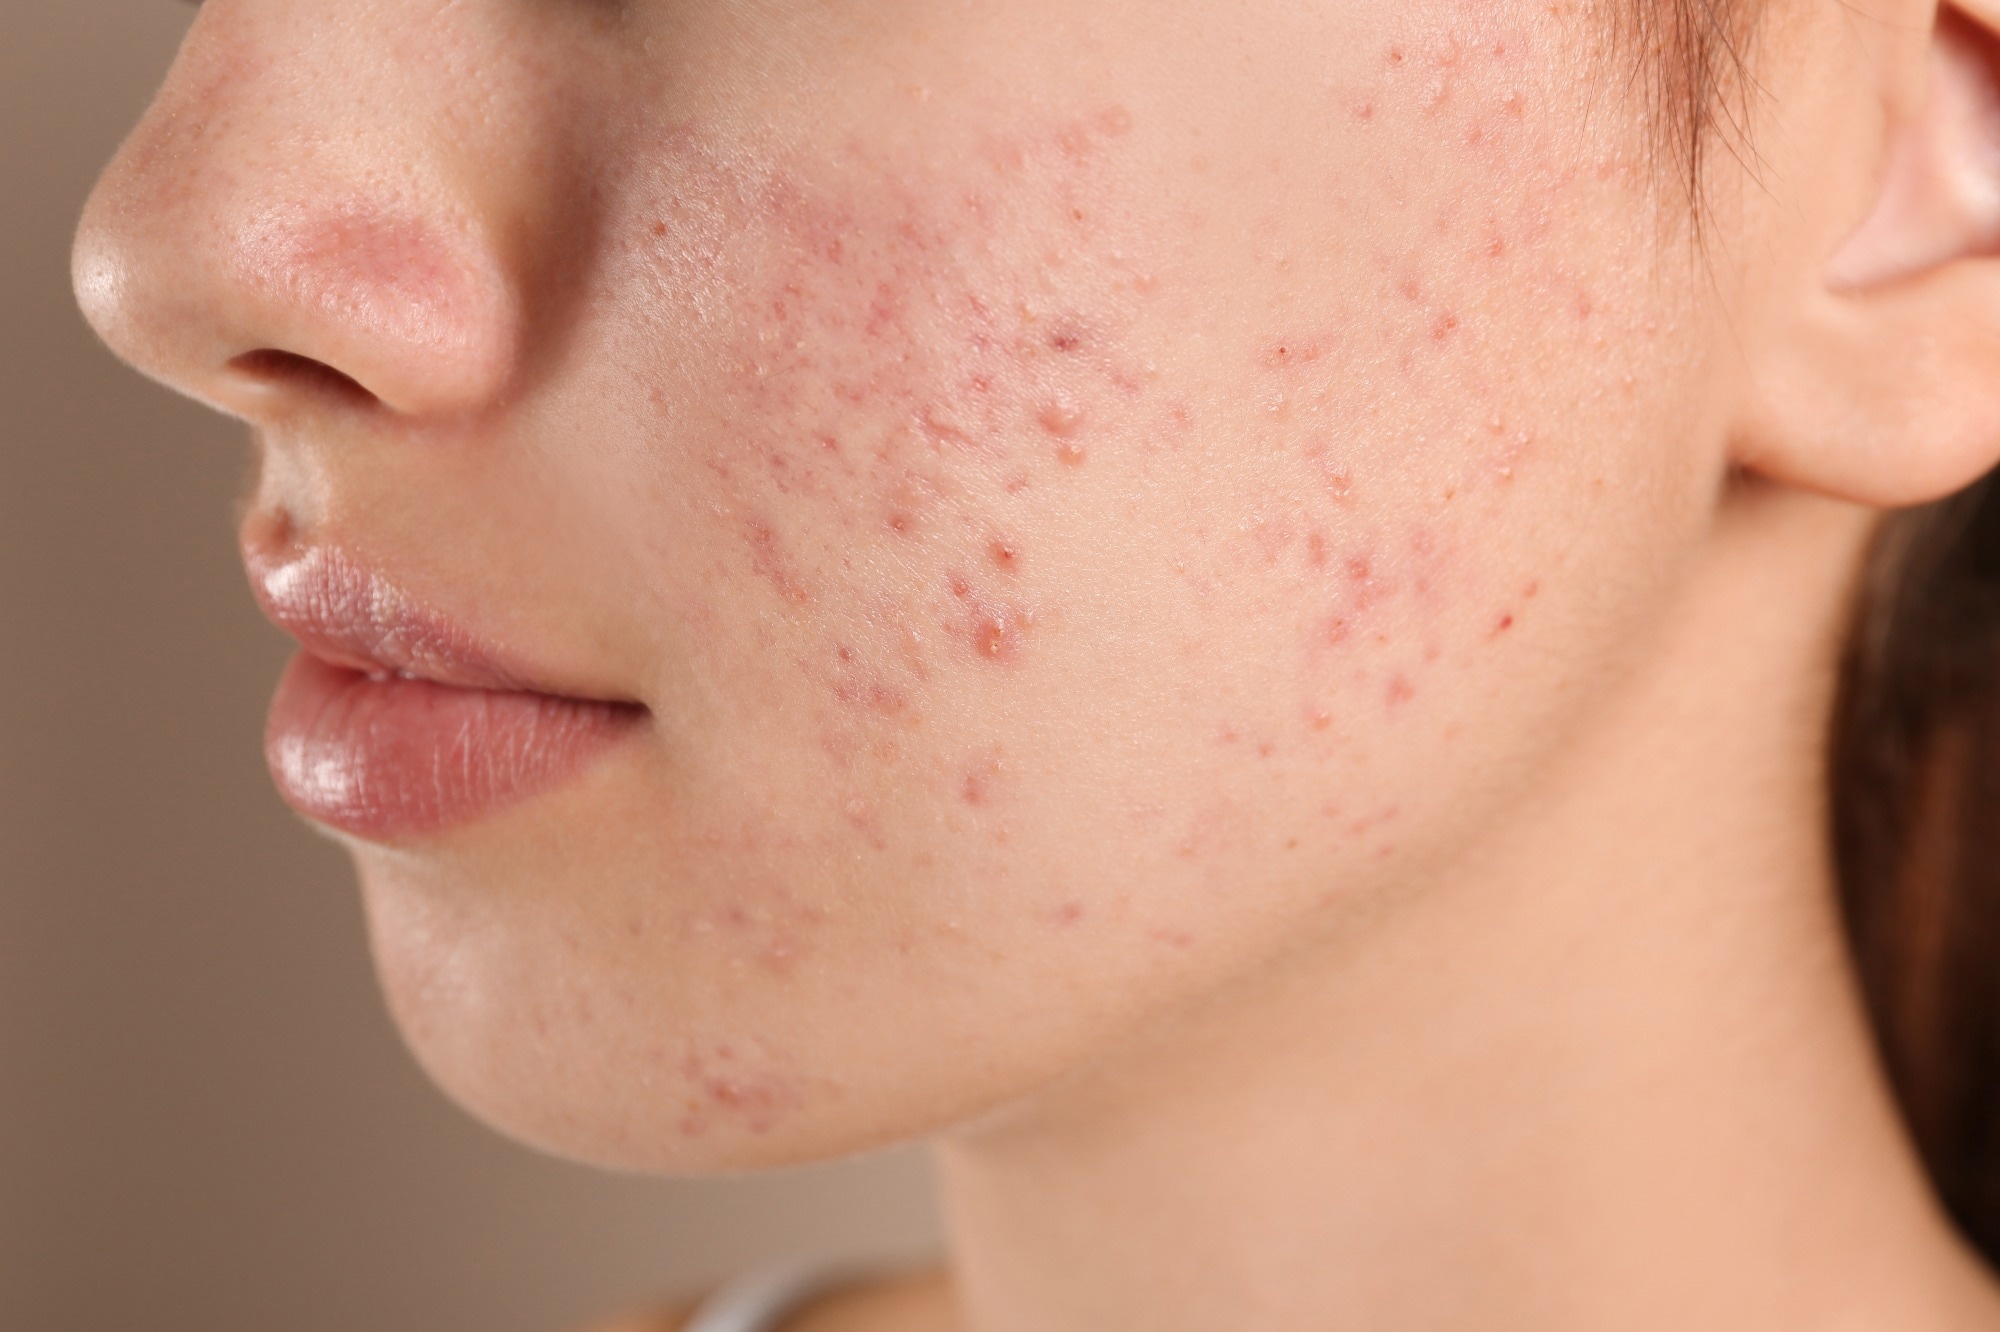 Study: Evaluation of stigma toward individuals with acne. Image Credit: New Africa / Shutterstock.com